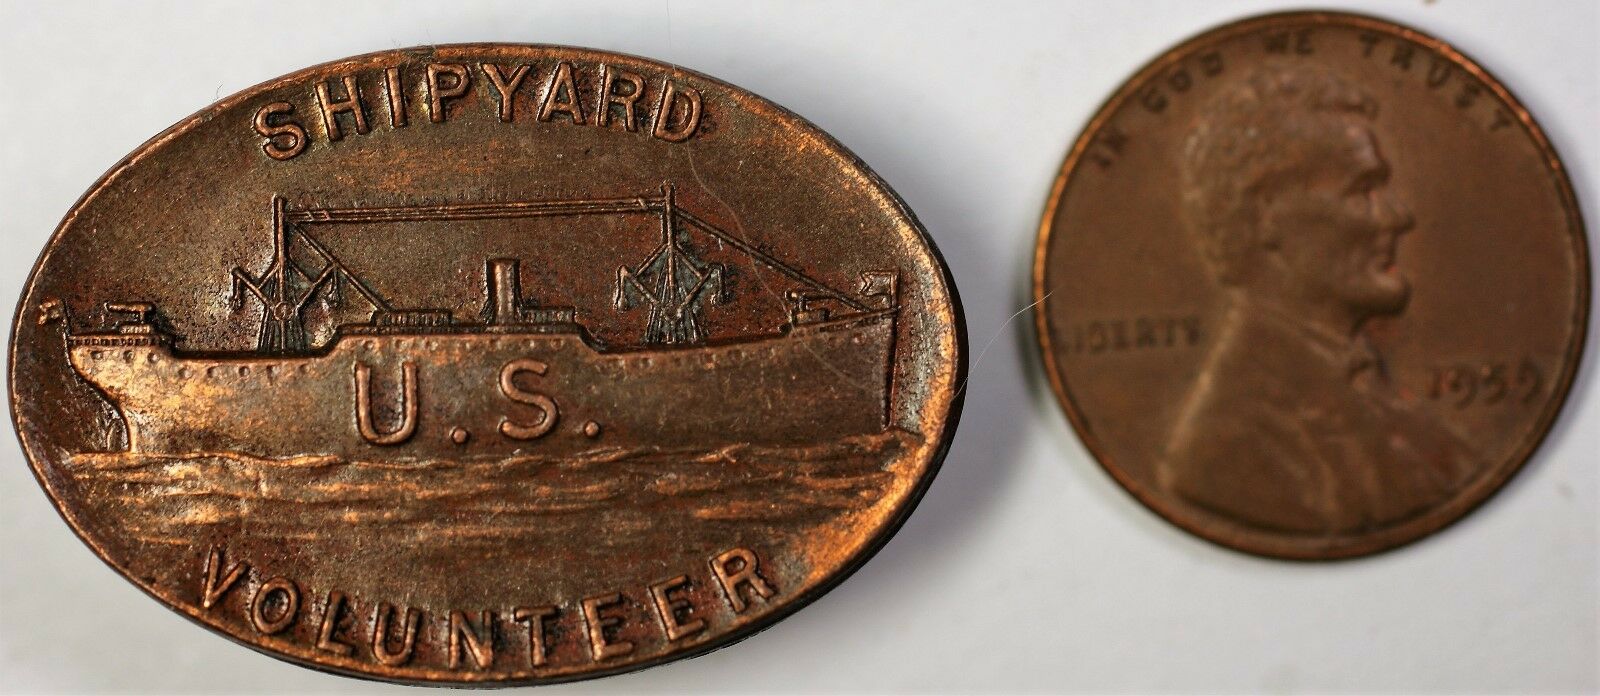 United States Shipyard Volunteer Bronze World War 2 Two Button Hole Cover